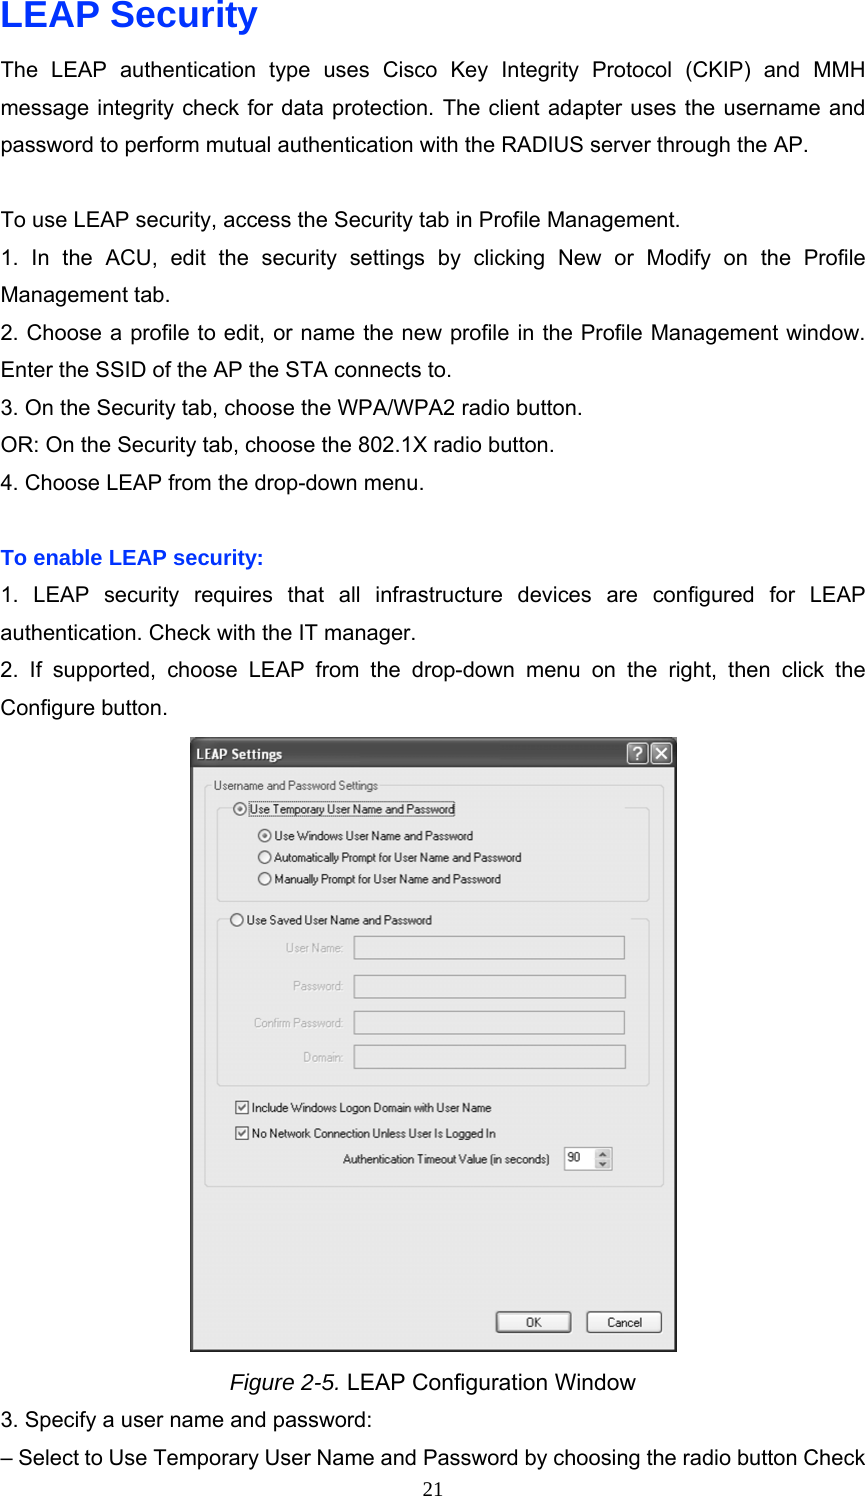 LEAP Security The LEAP authentication type uses Cisco Key Integrity Protocol (CKIP) and MMH message integrity check for data protection. The client adapter uses the username and password to perform mutual authentication with the RADIUS server through the AP.  To use LEAP security, access the Security tab in Profile Management. 1. In the ACU, edit the security settings by clicking New or Modify on the Profile Management tab. 2. Choose a profile to edit, or name the new profile in the Profile Management window. Enter the SSID of the AP the STA connects to. 3. On the Security tab, choose the WPA/WPA2 radio button. OR: On the Security tab, choose the 802.1X radio button. 4. Choose LEAP from the drop-down menu.  To enable LEAP security: 1. LEAP security requires that all infrastructure devices are configured for LEAP authentication. Check with the IT manager. 2. If supported, choose LEAP from the drop-down menu on the right, then click the Configure button.  Figure 2-5. LEAP Configuration Window 3. Specify a user name and password: – Select to Use Temporary User Name and Password by choosing the radio button Check  21